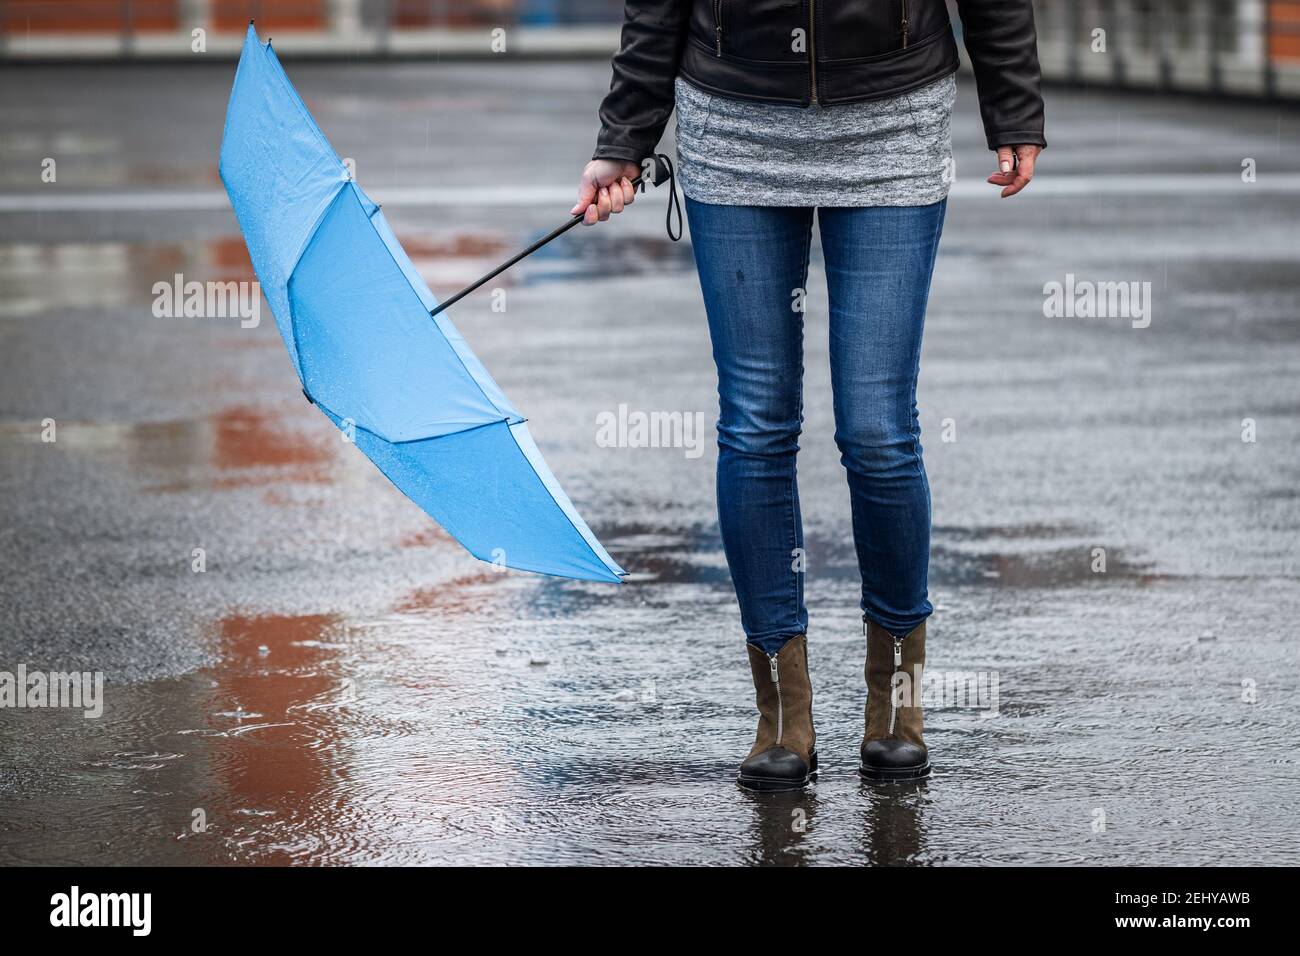 Woman with umbrella walking in rain at city street. Female legs wearing  jeans and waterproof leather boot Stock Photo - Alamy